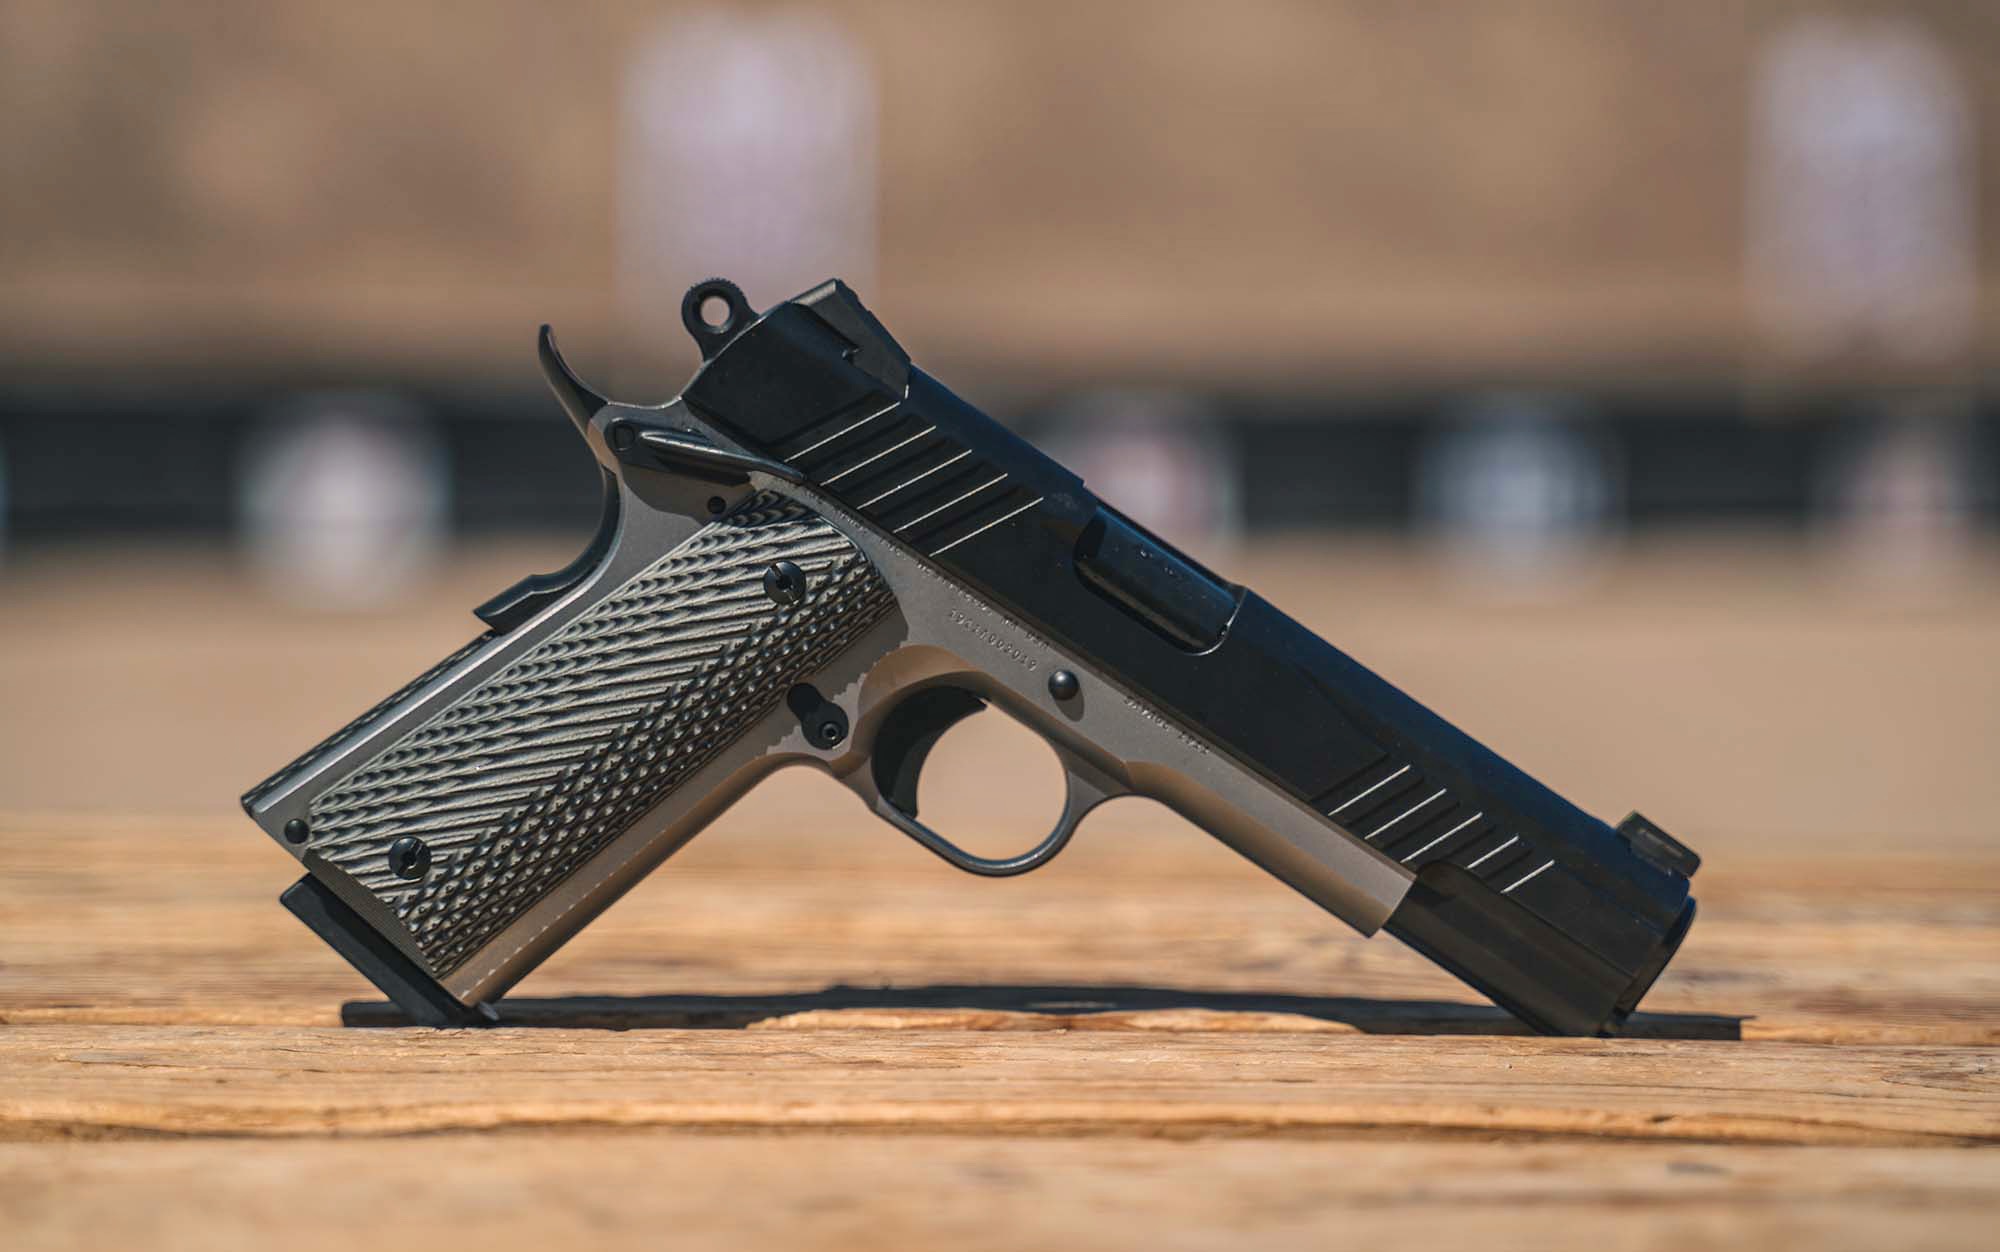 One of the best 1911s